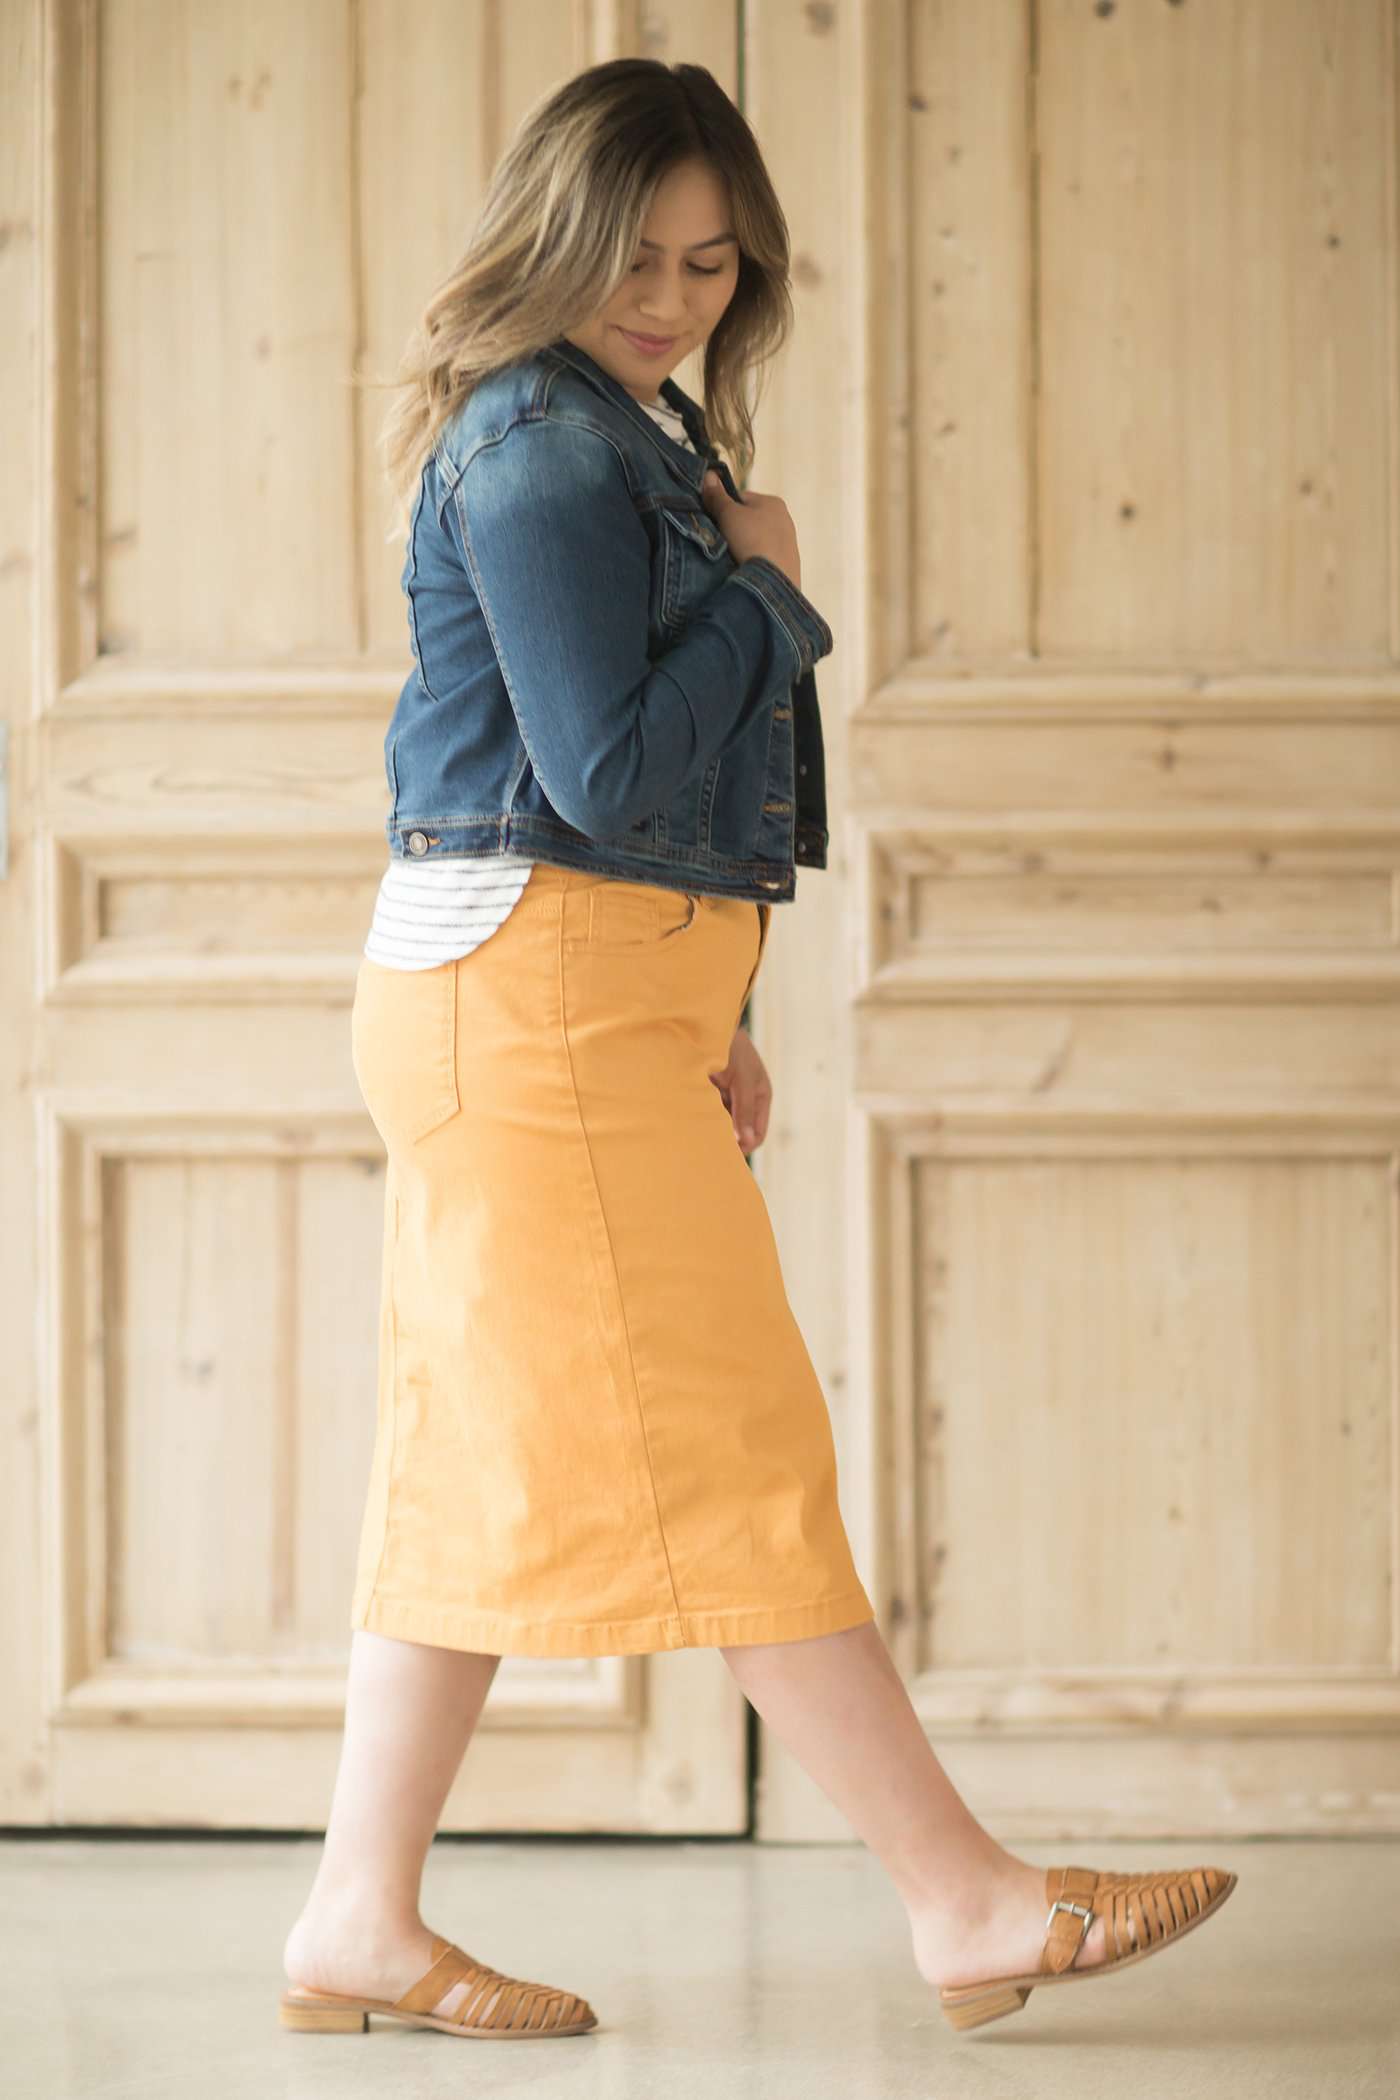 Details more than 143 modest colored denim skirts latest